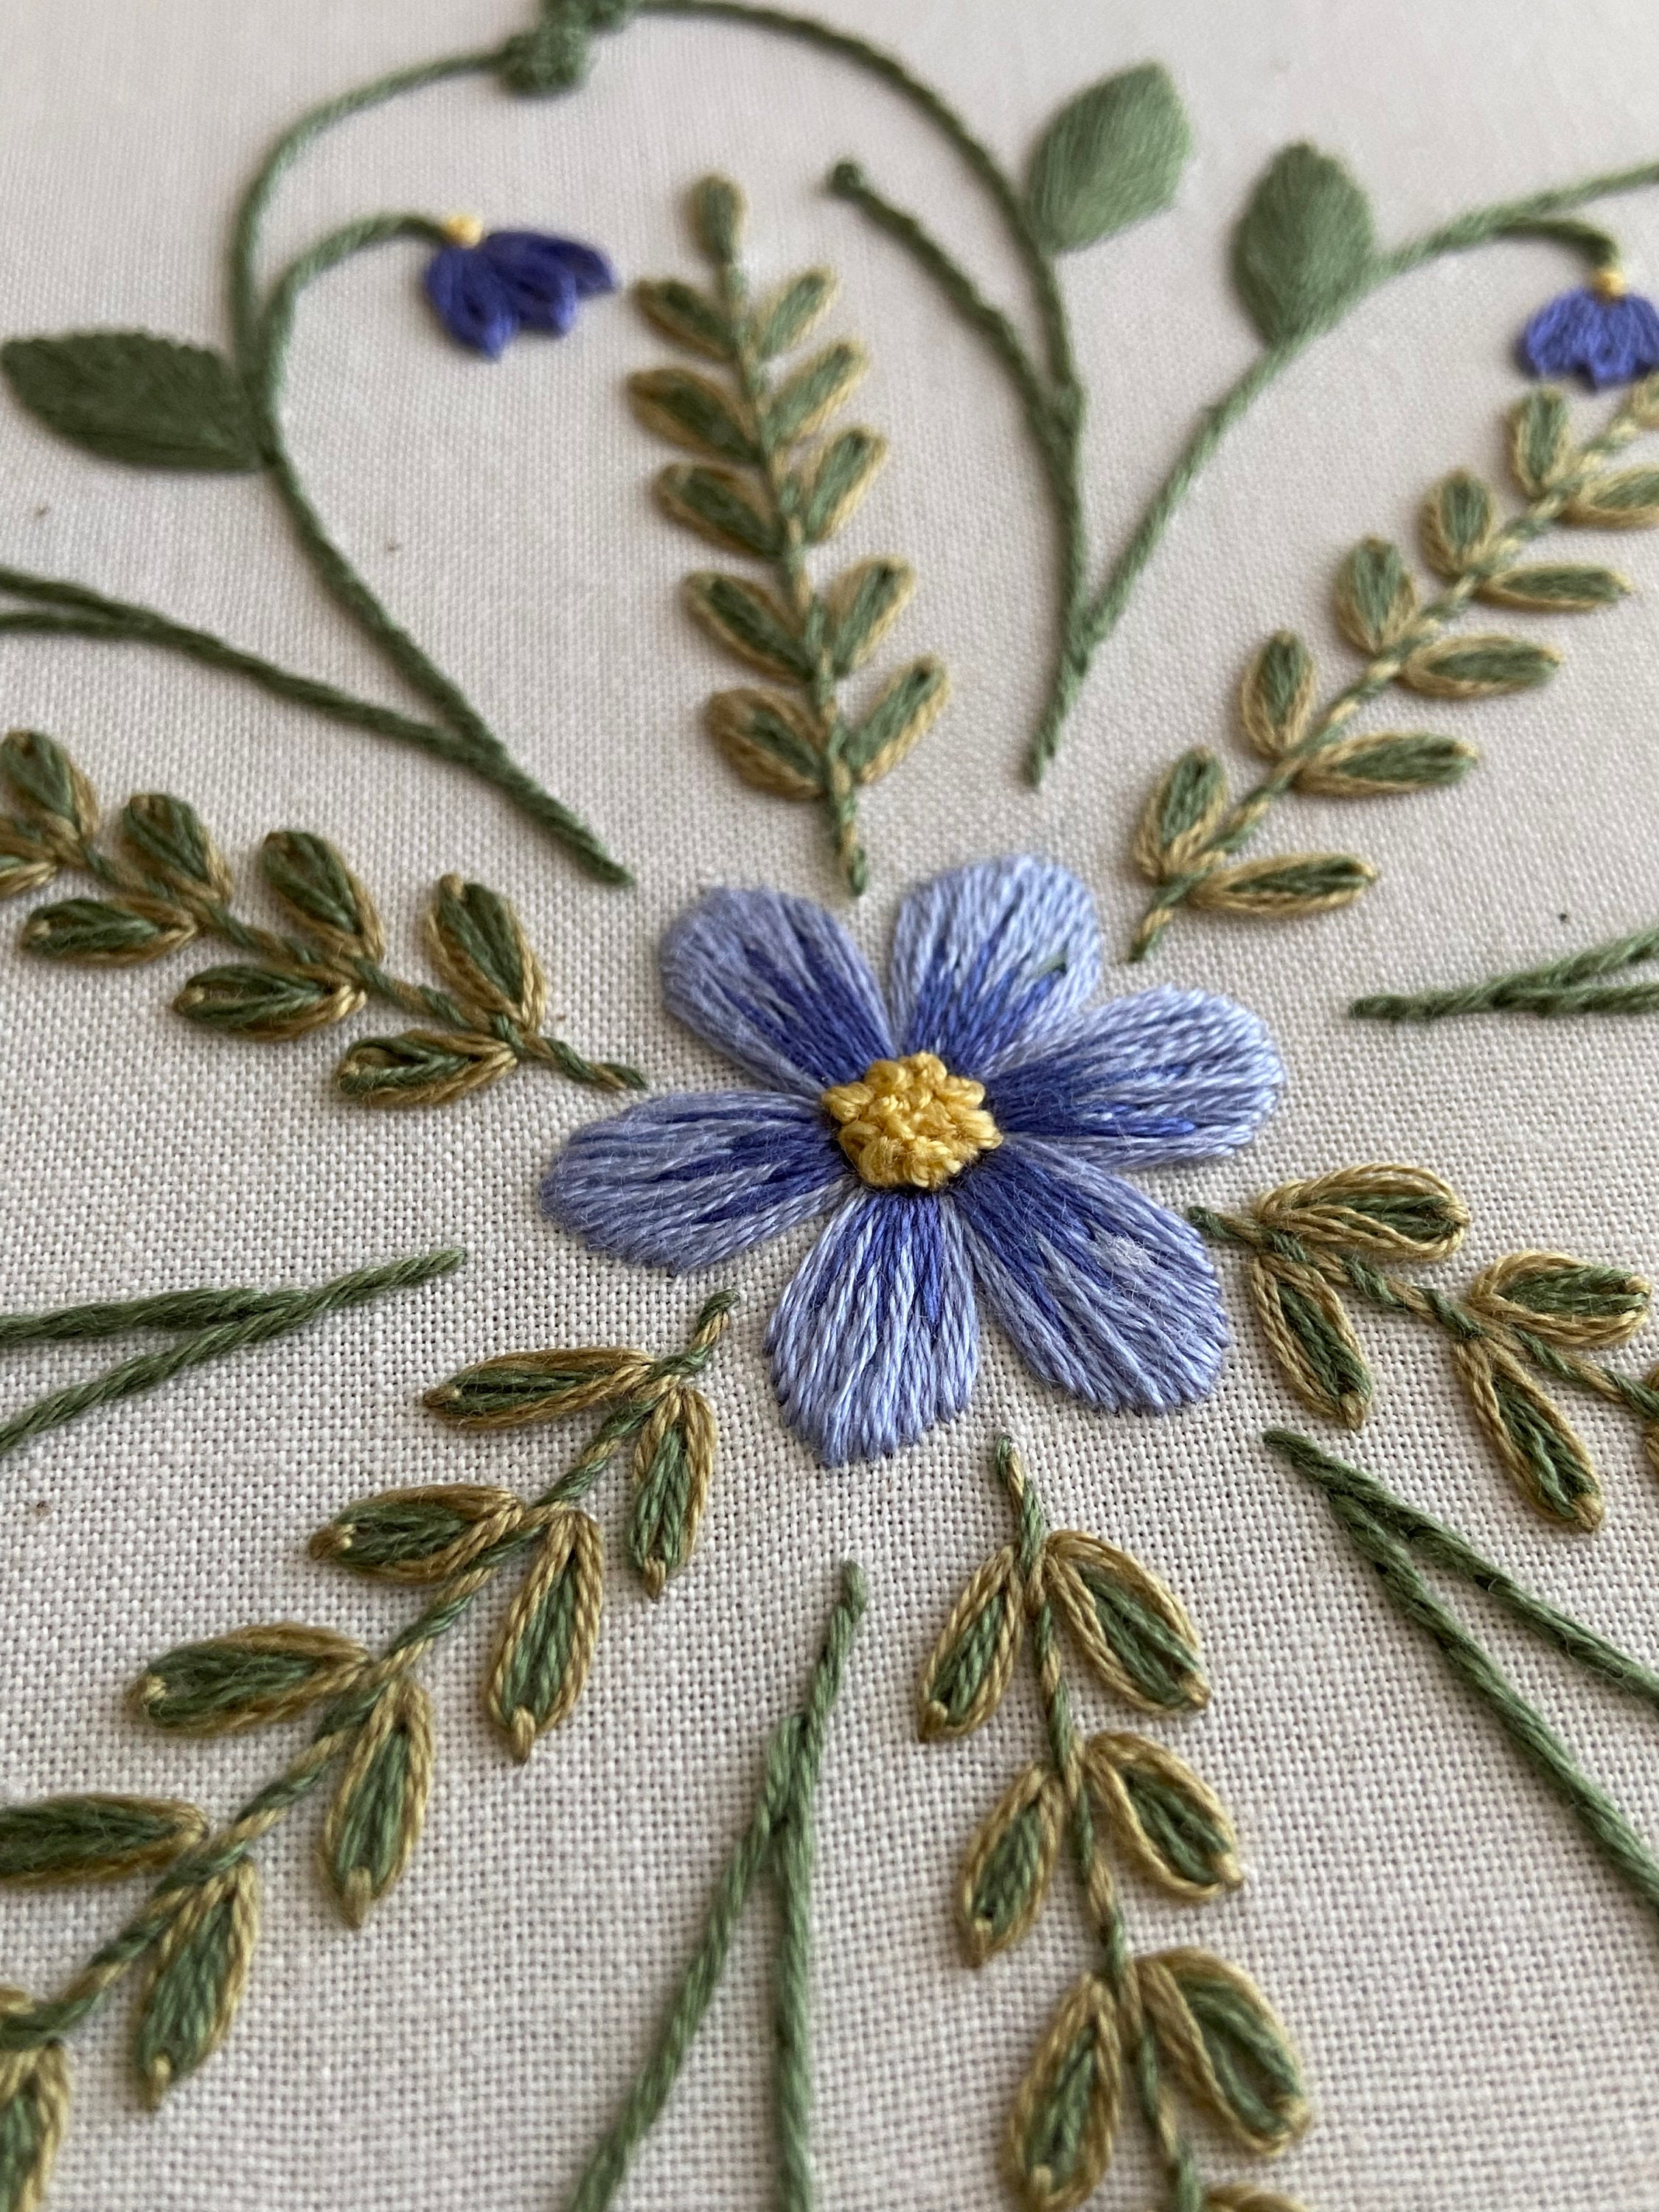 In Bloom: Floral Embroidery Patterns (iron-on transfers) – Lazy May Sewing  Club